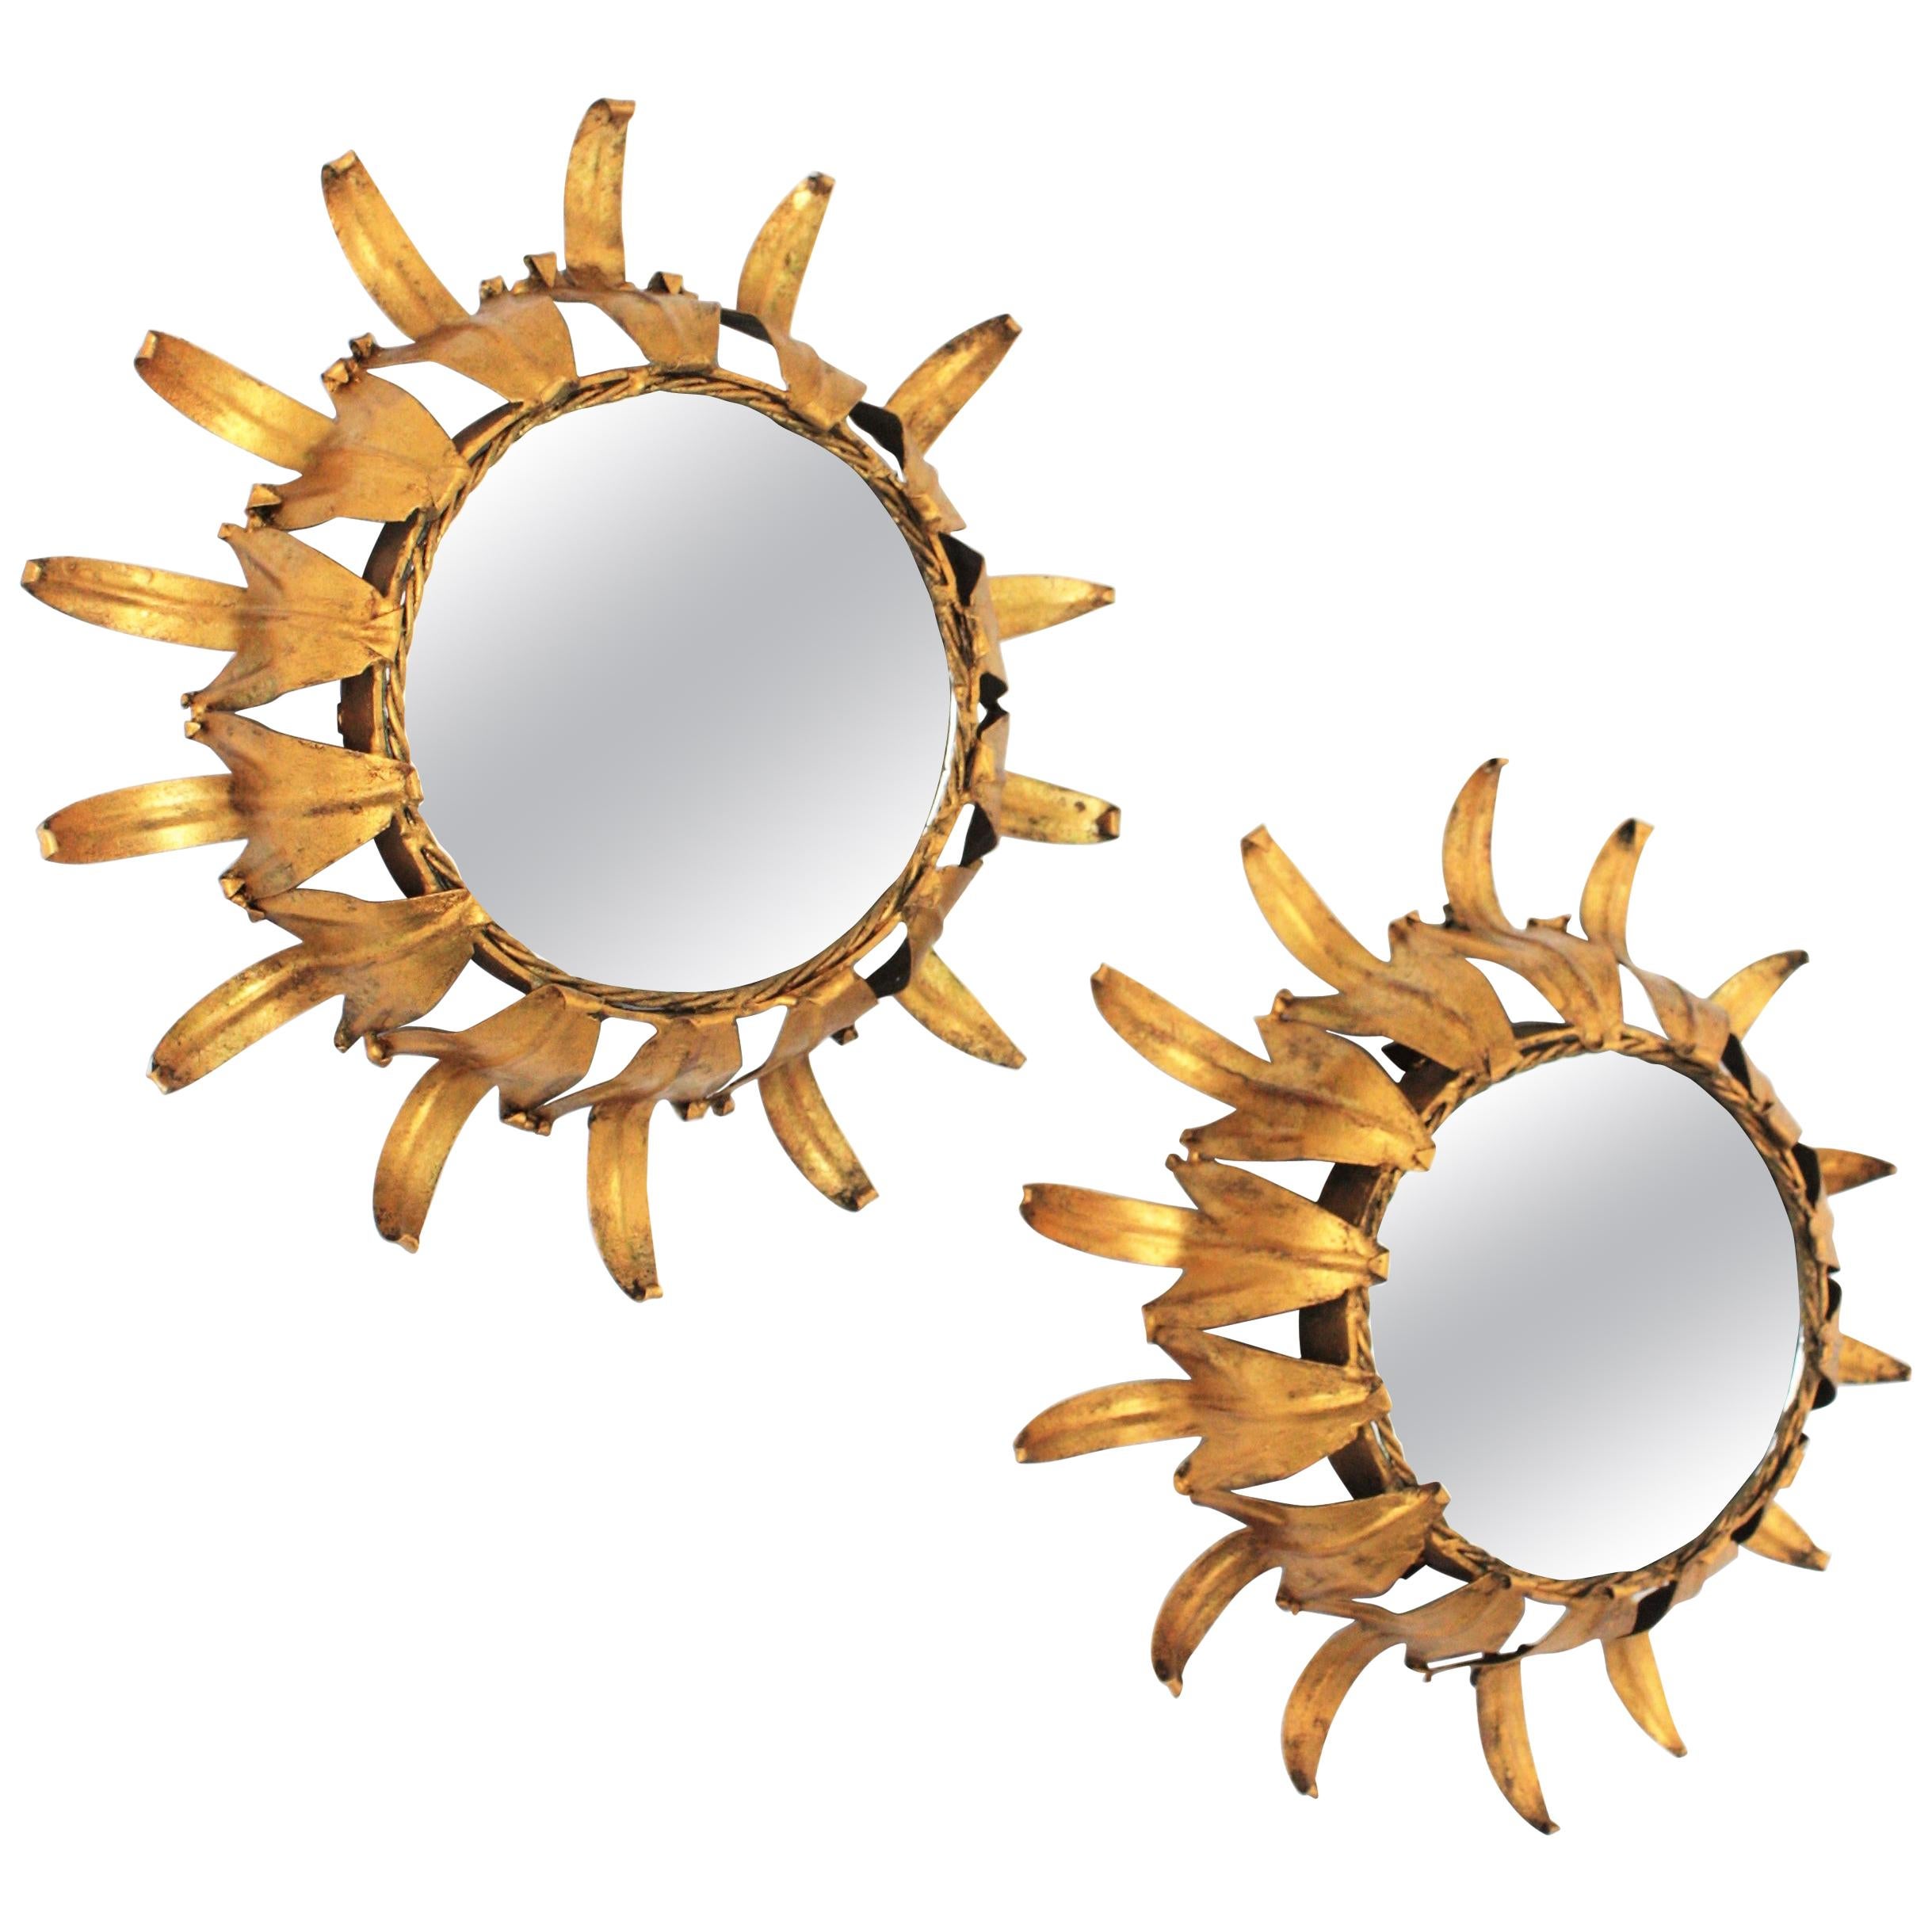 Pair of Sunburst Wall Mirrors in Gilt Iron in the Style of Hollywood Regency